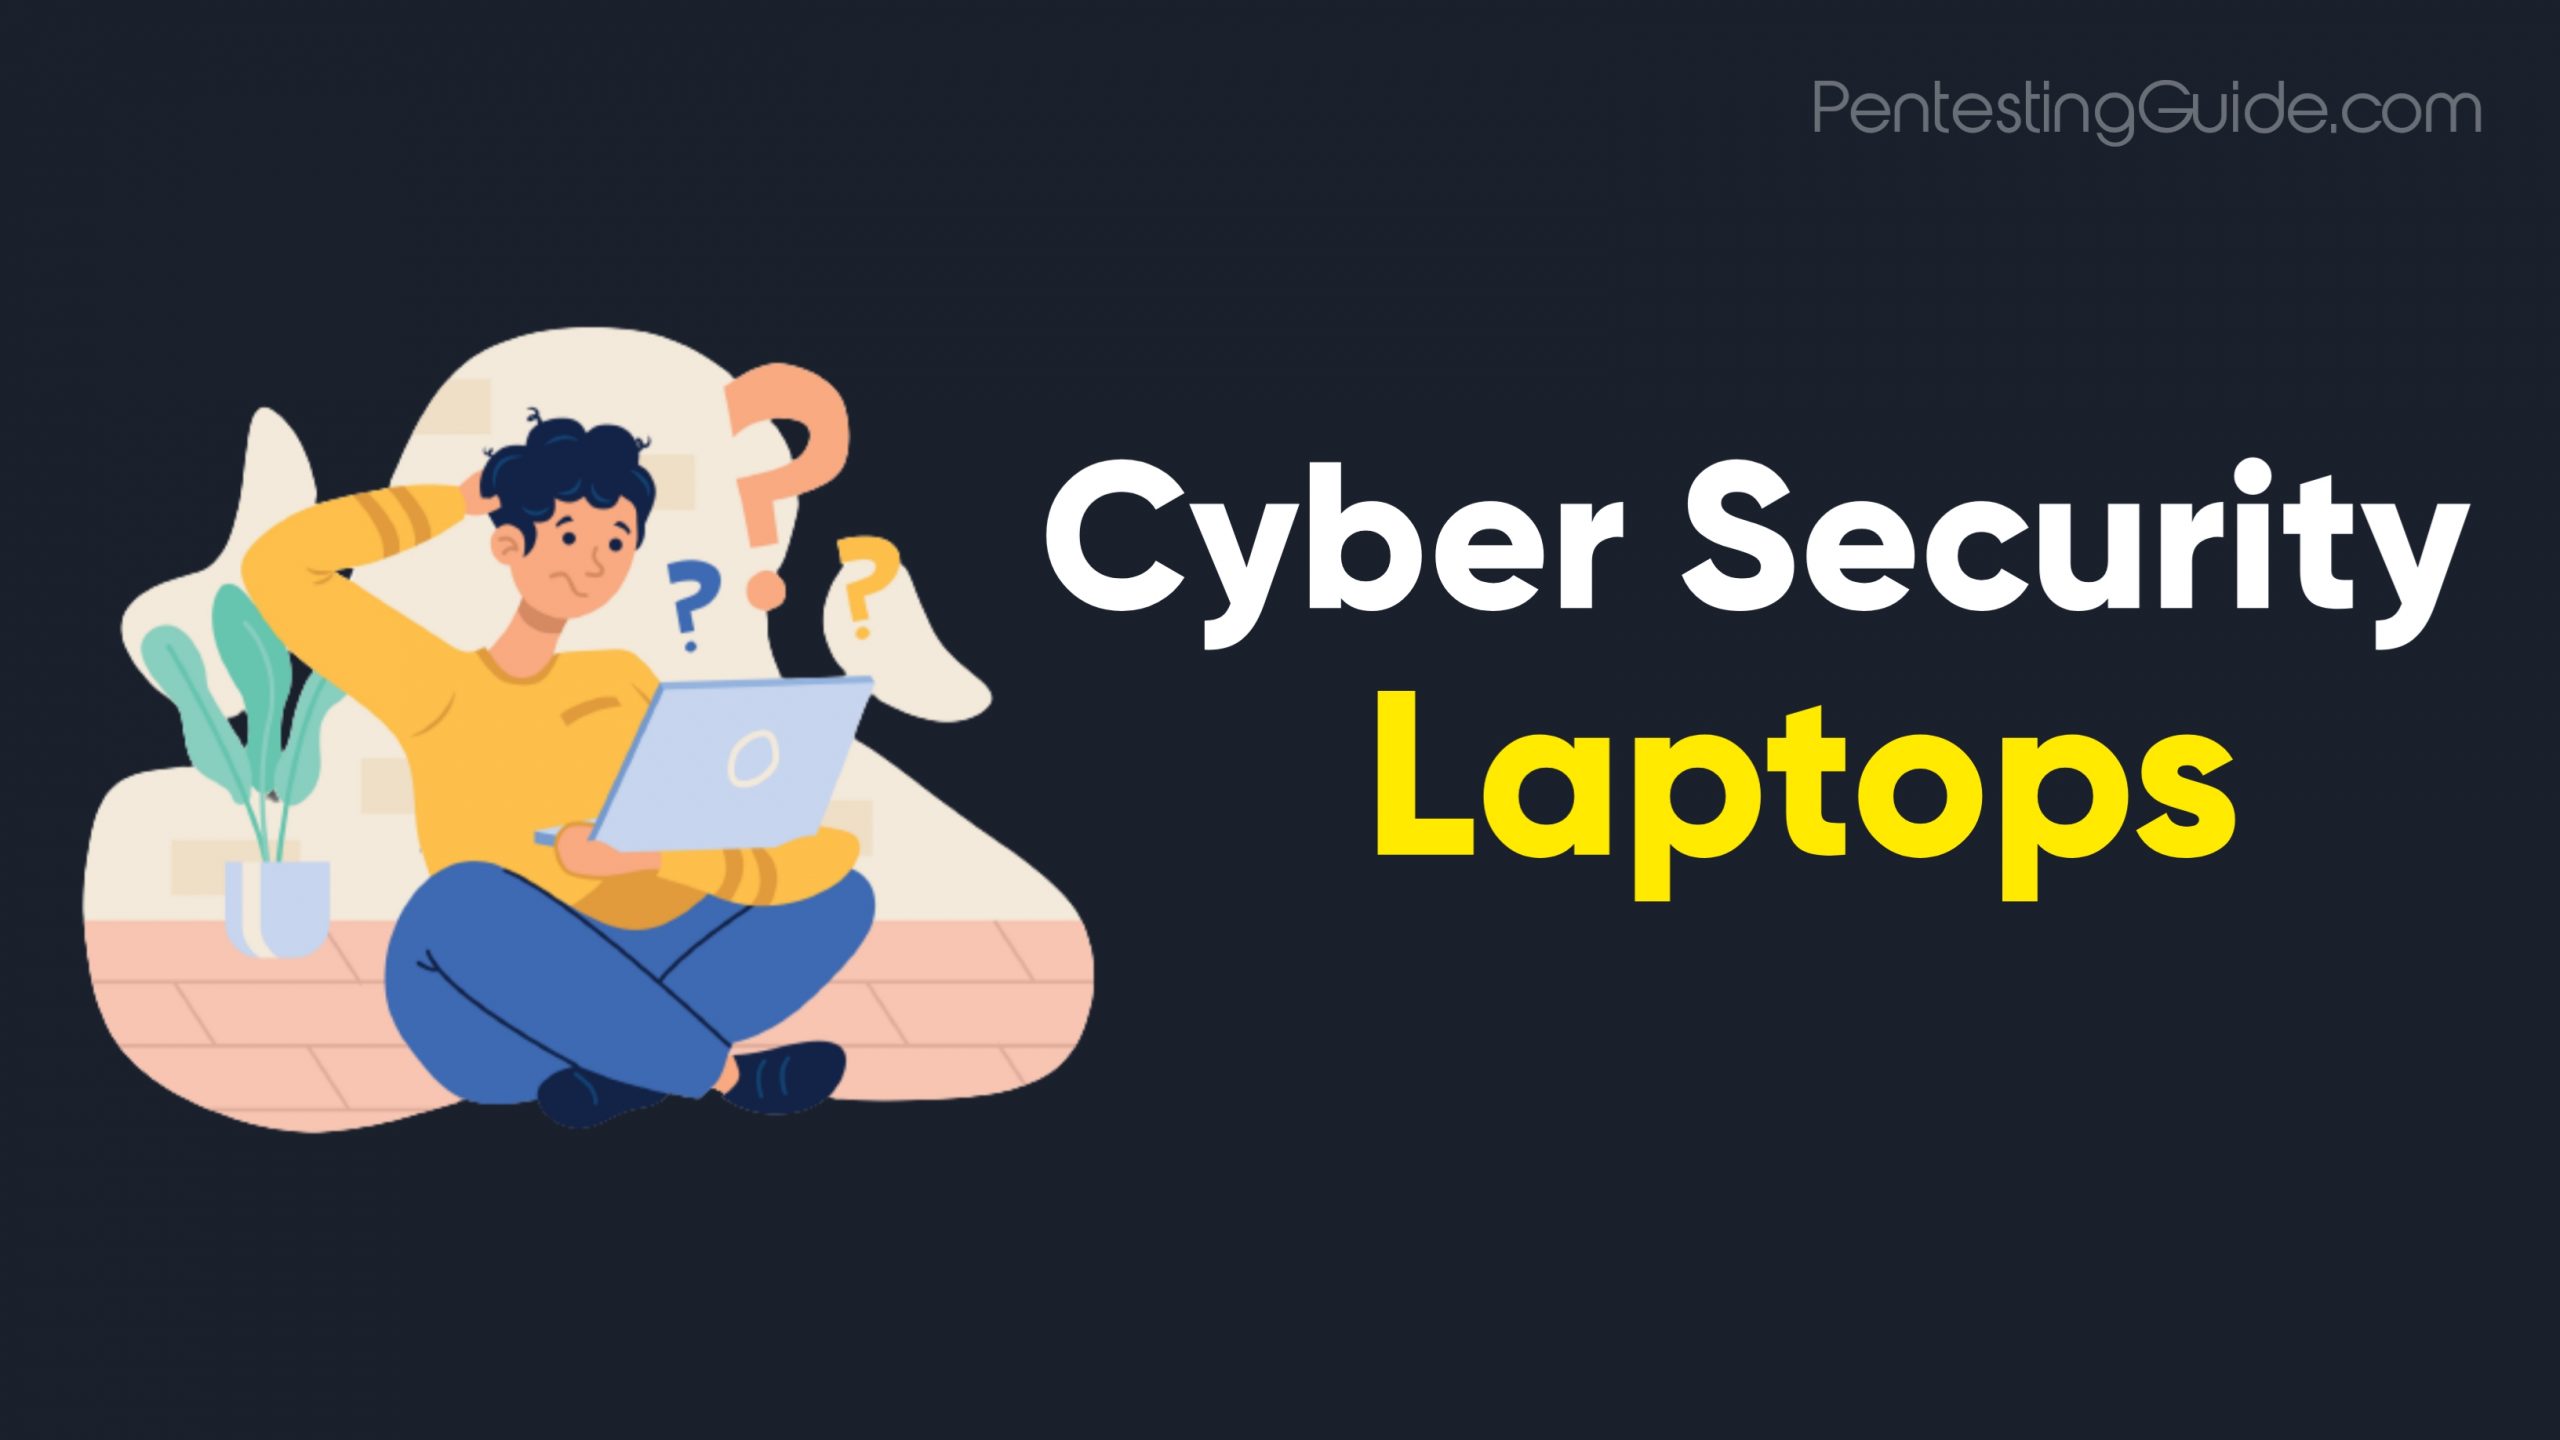 Laptops for cyber security